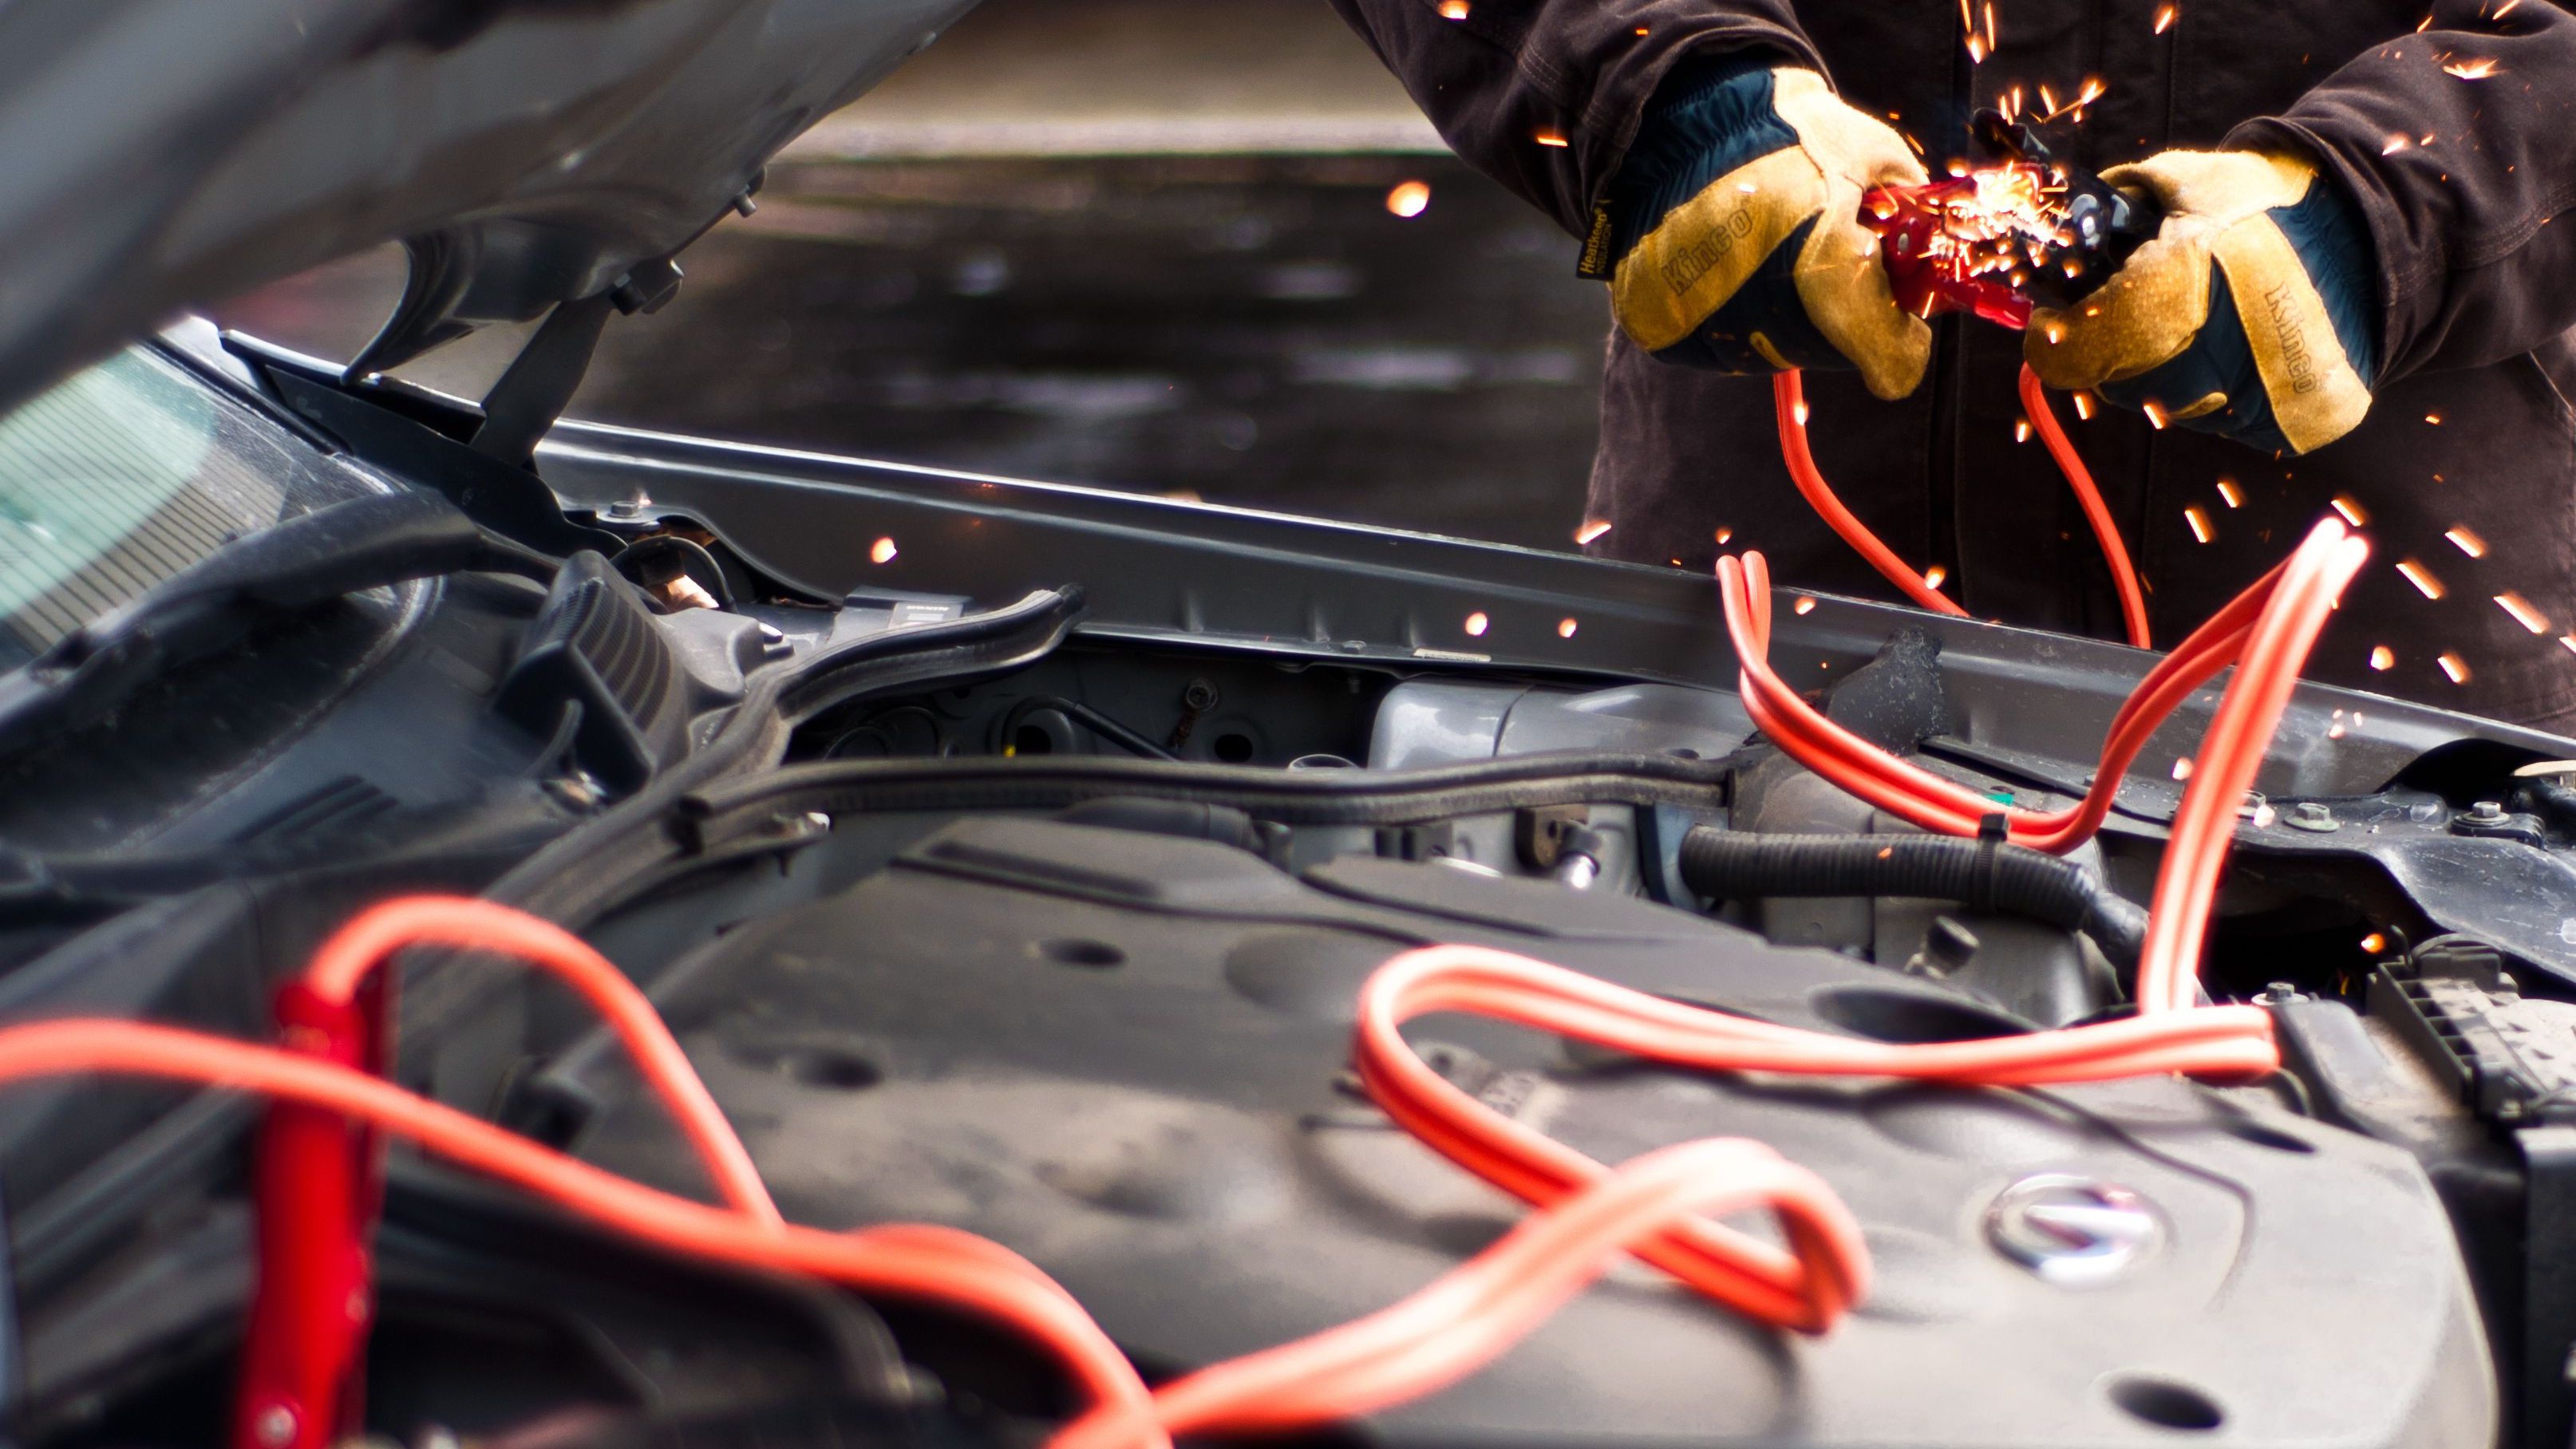 How to Pick a Good Car Battery